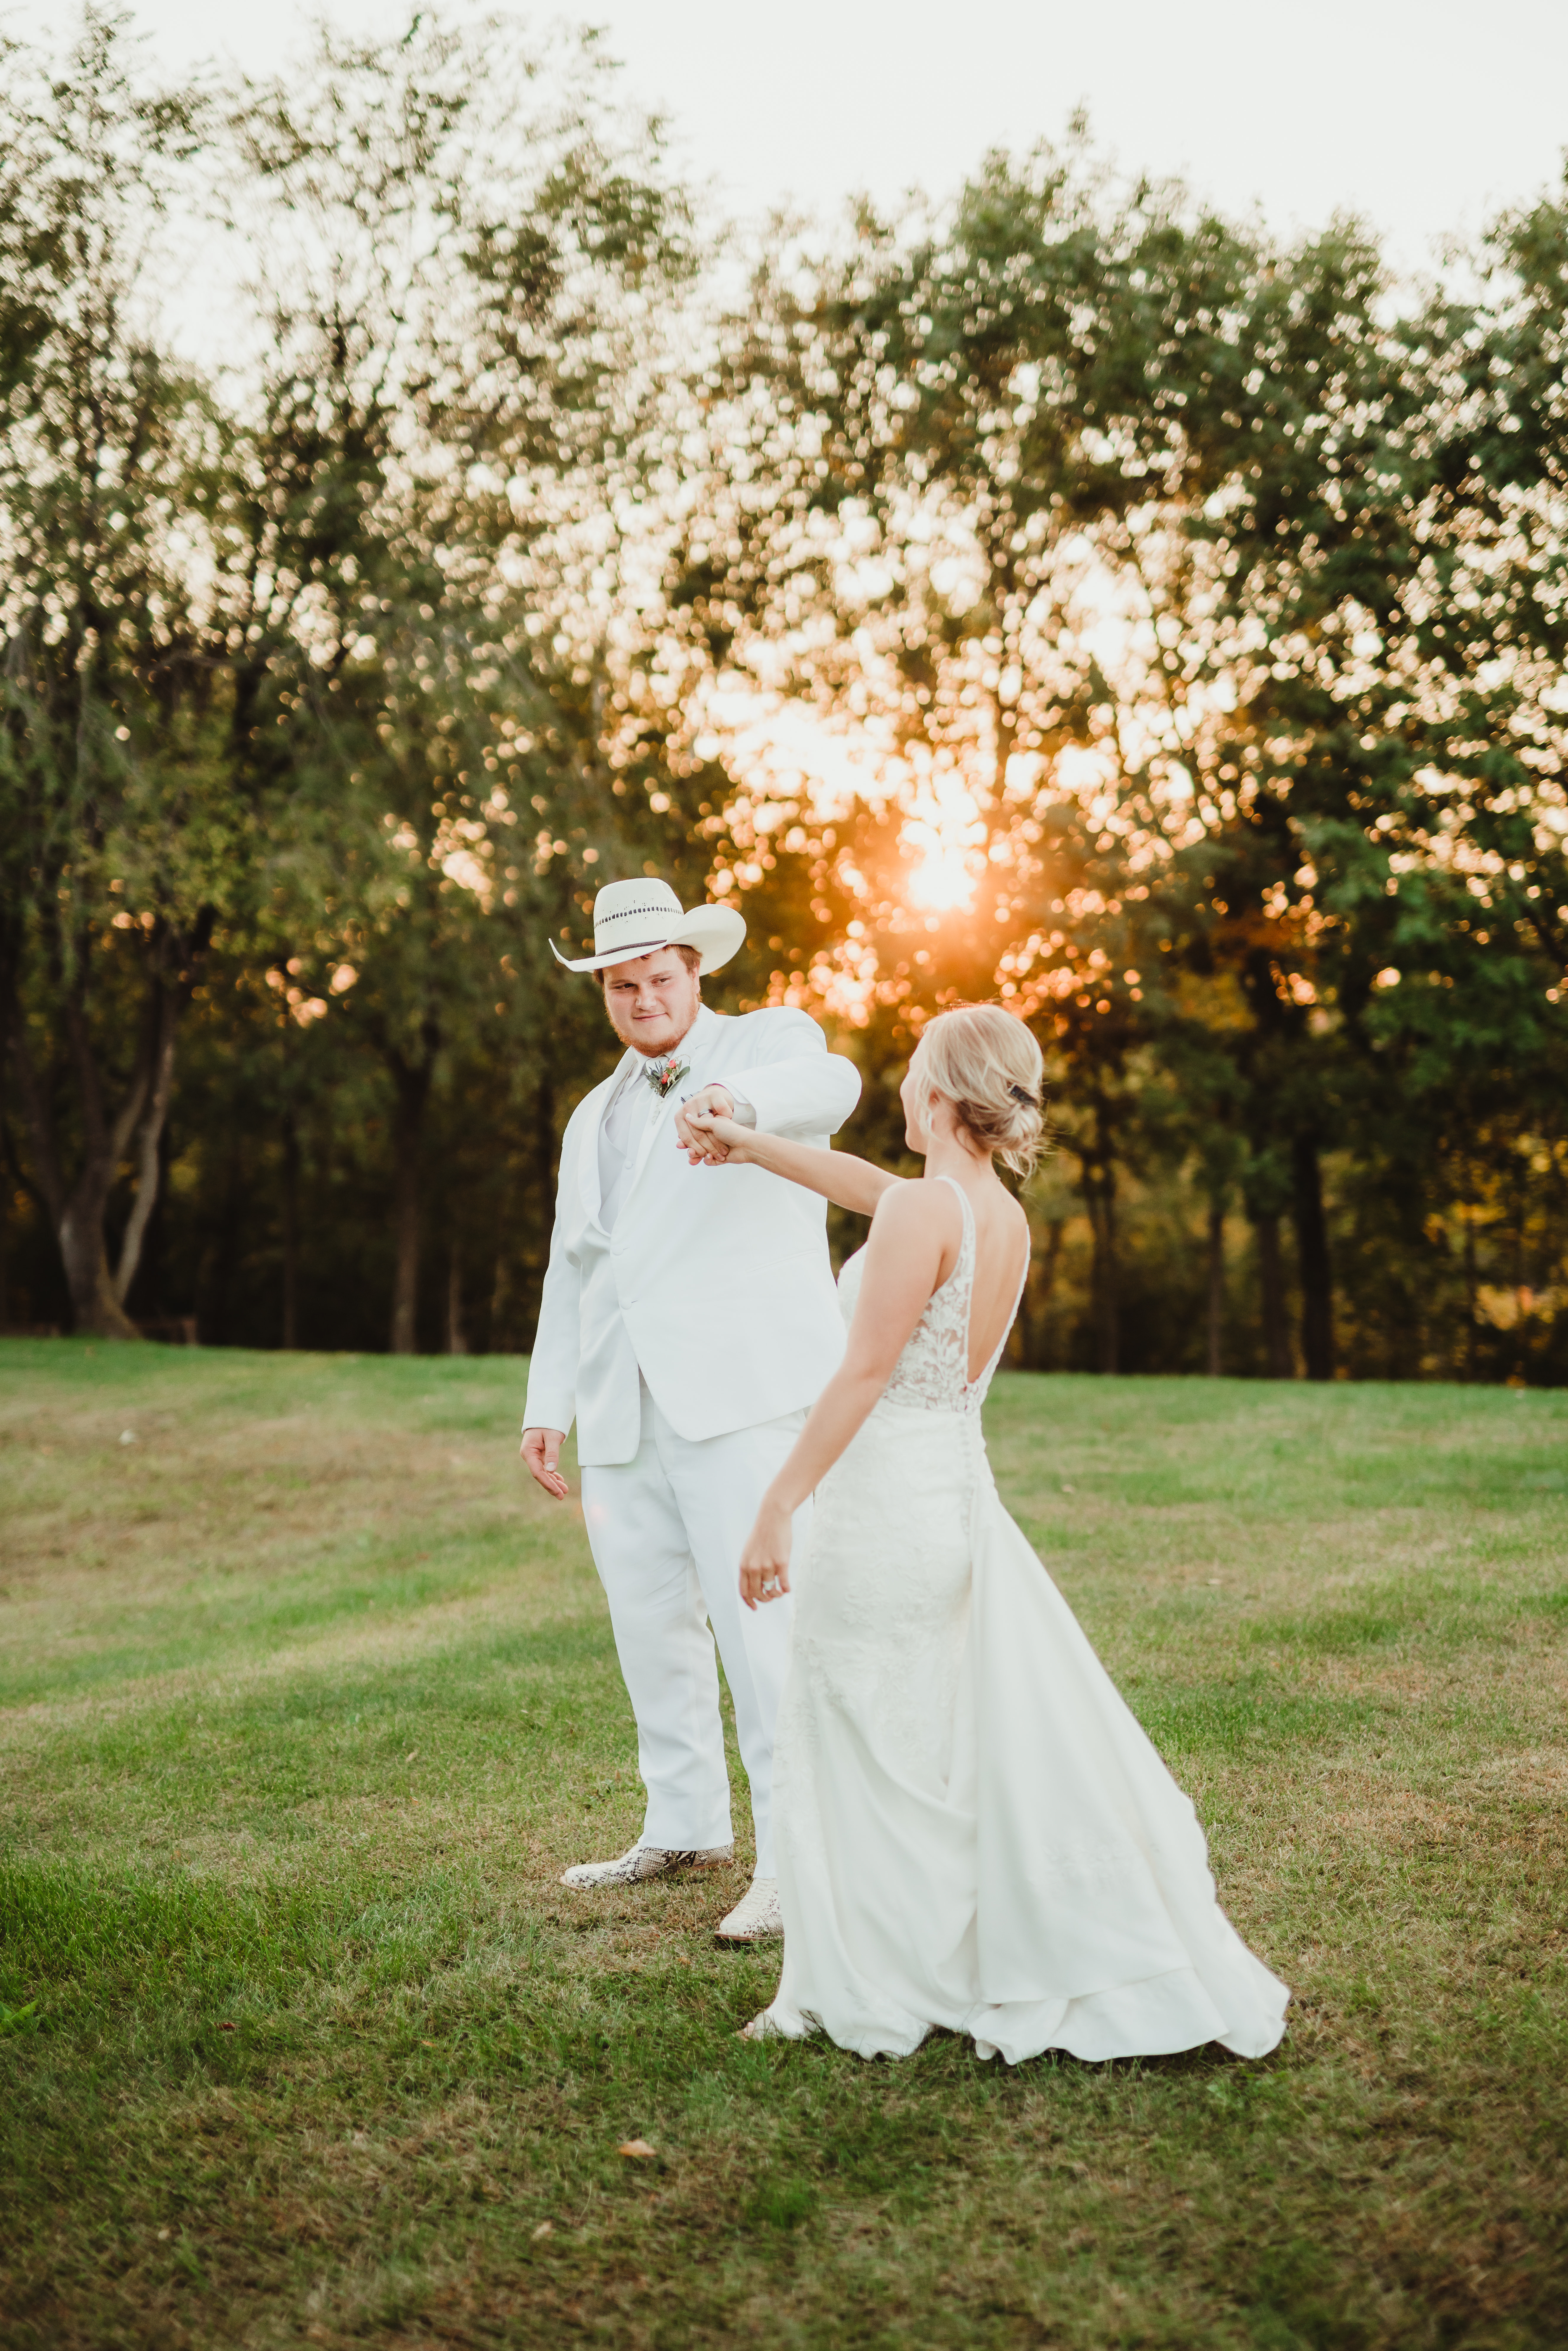 A newlywed couple dances on the lawn of their Wisconsin wedding venue. Bride and groom pose Newlywed photos Cowboy groom Groom outfit inspo #weddingplanning #weddingtimeline #diywedding #wisconsinweddingphotographer #wisconsinchurchwedding
